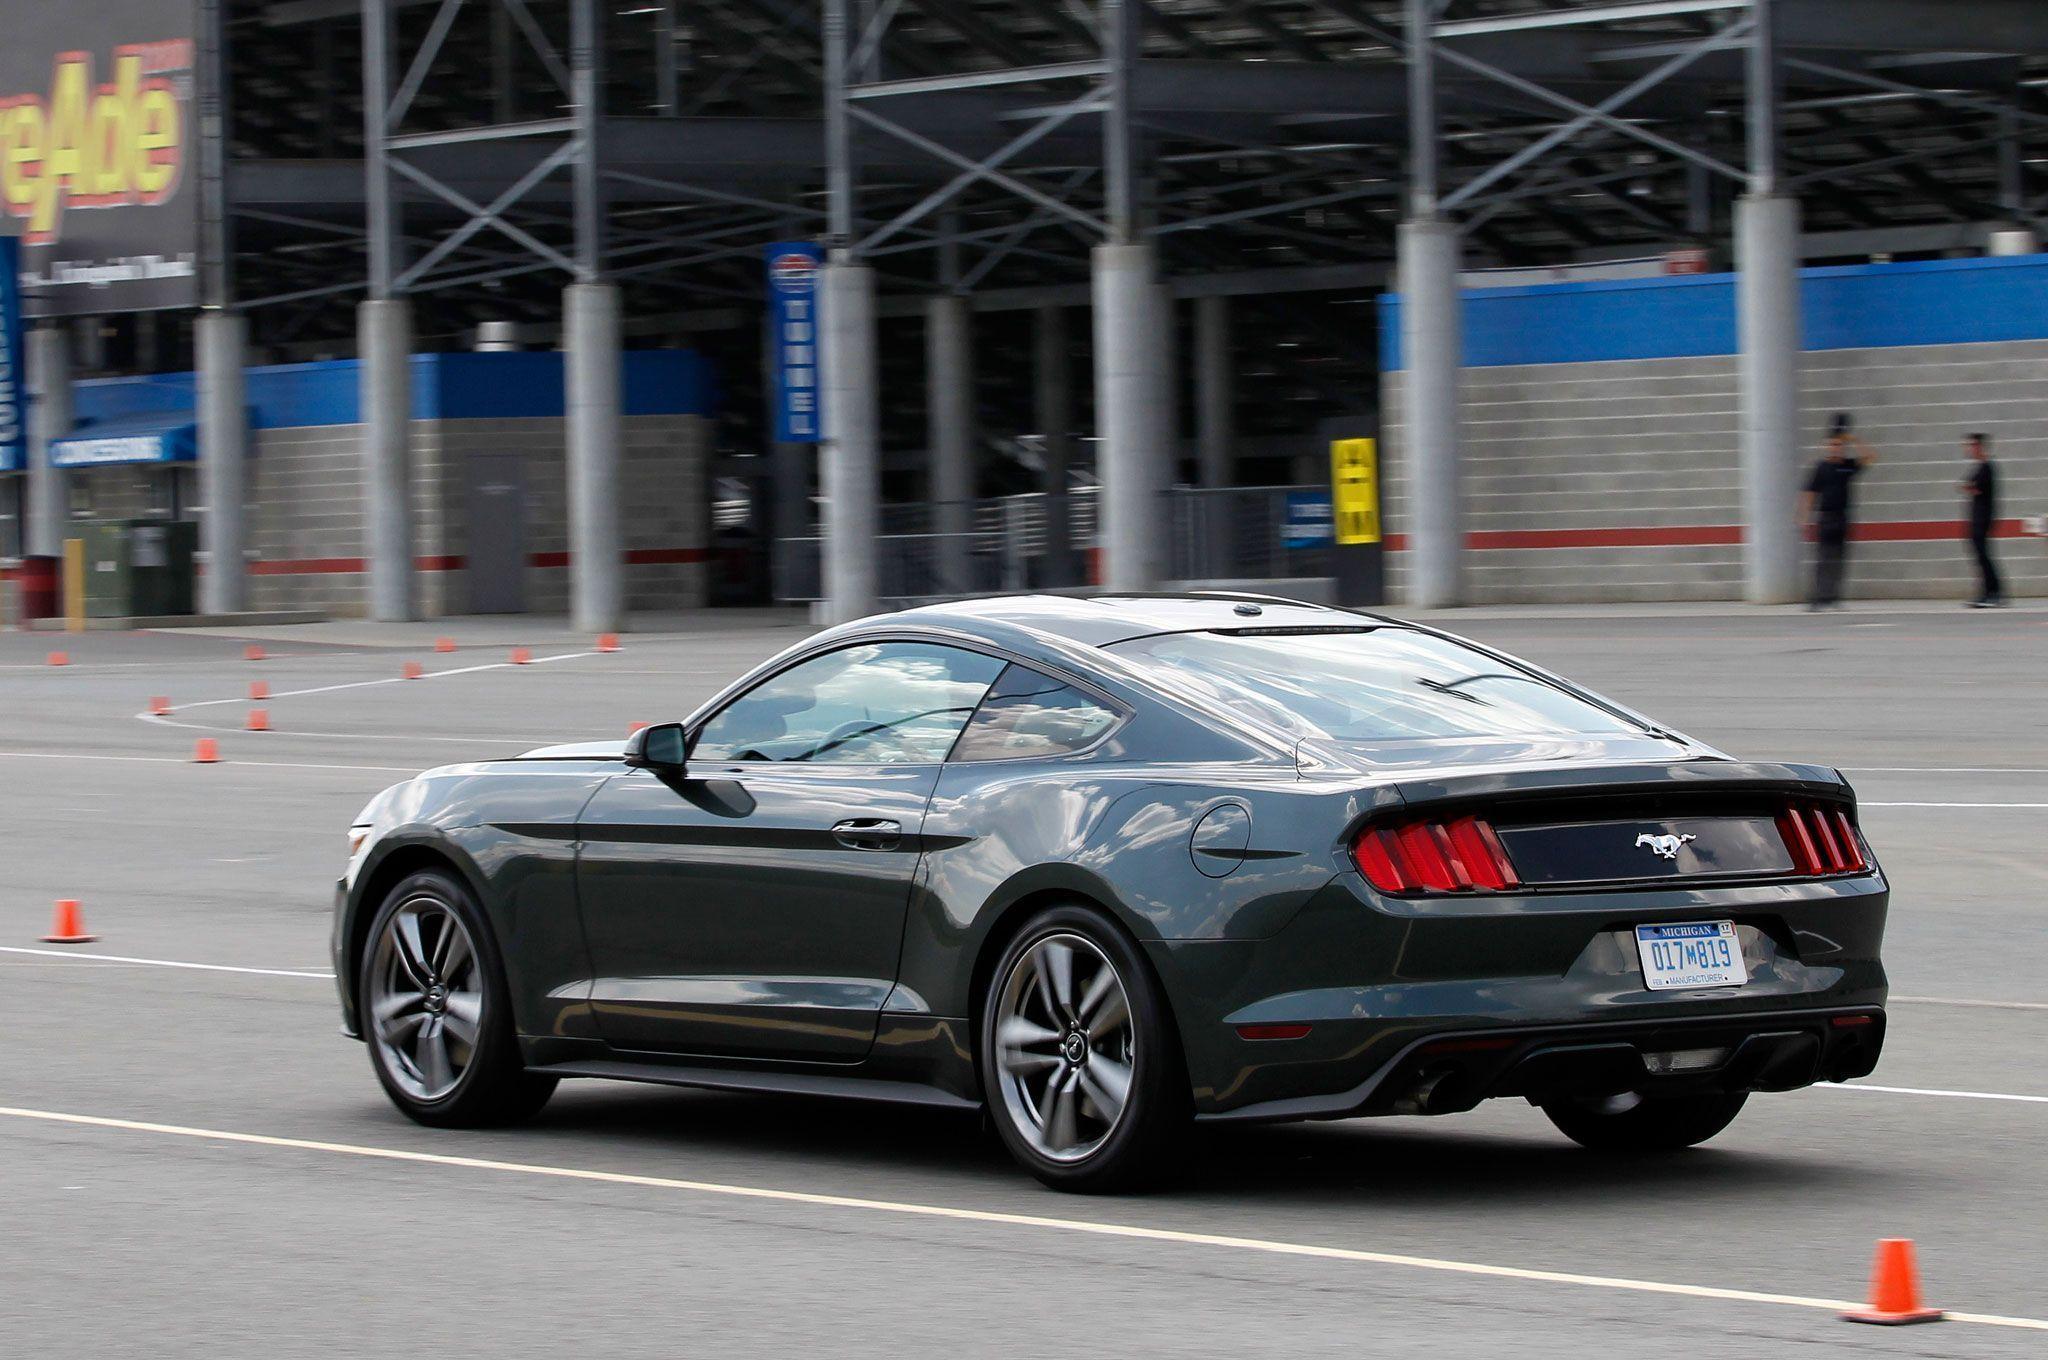 Ford Mustang GT Black HD Background Wallpaper Car